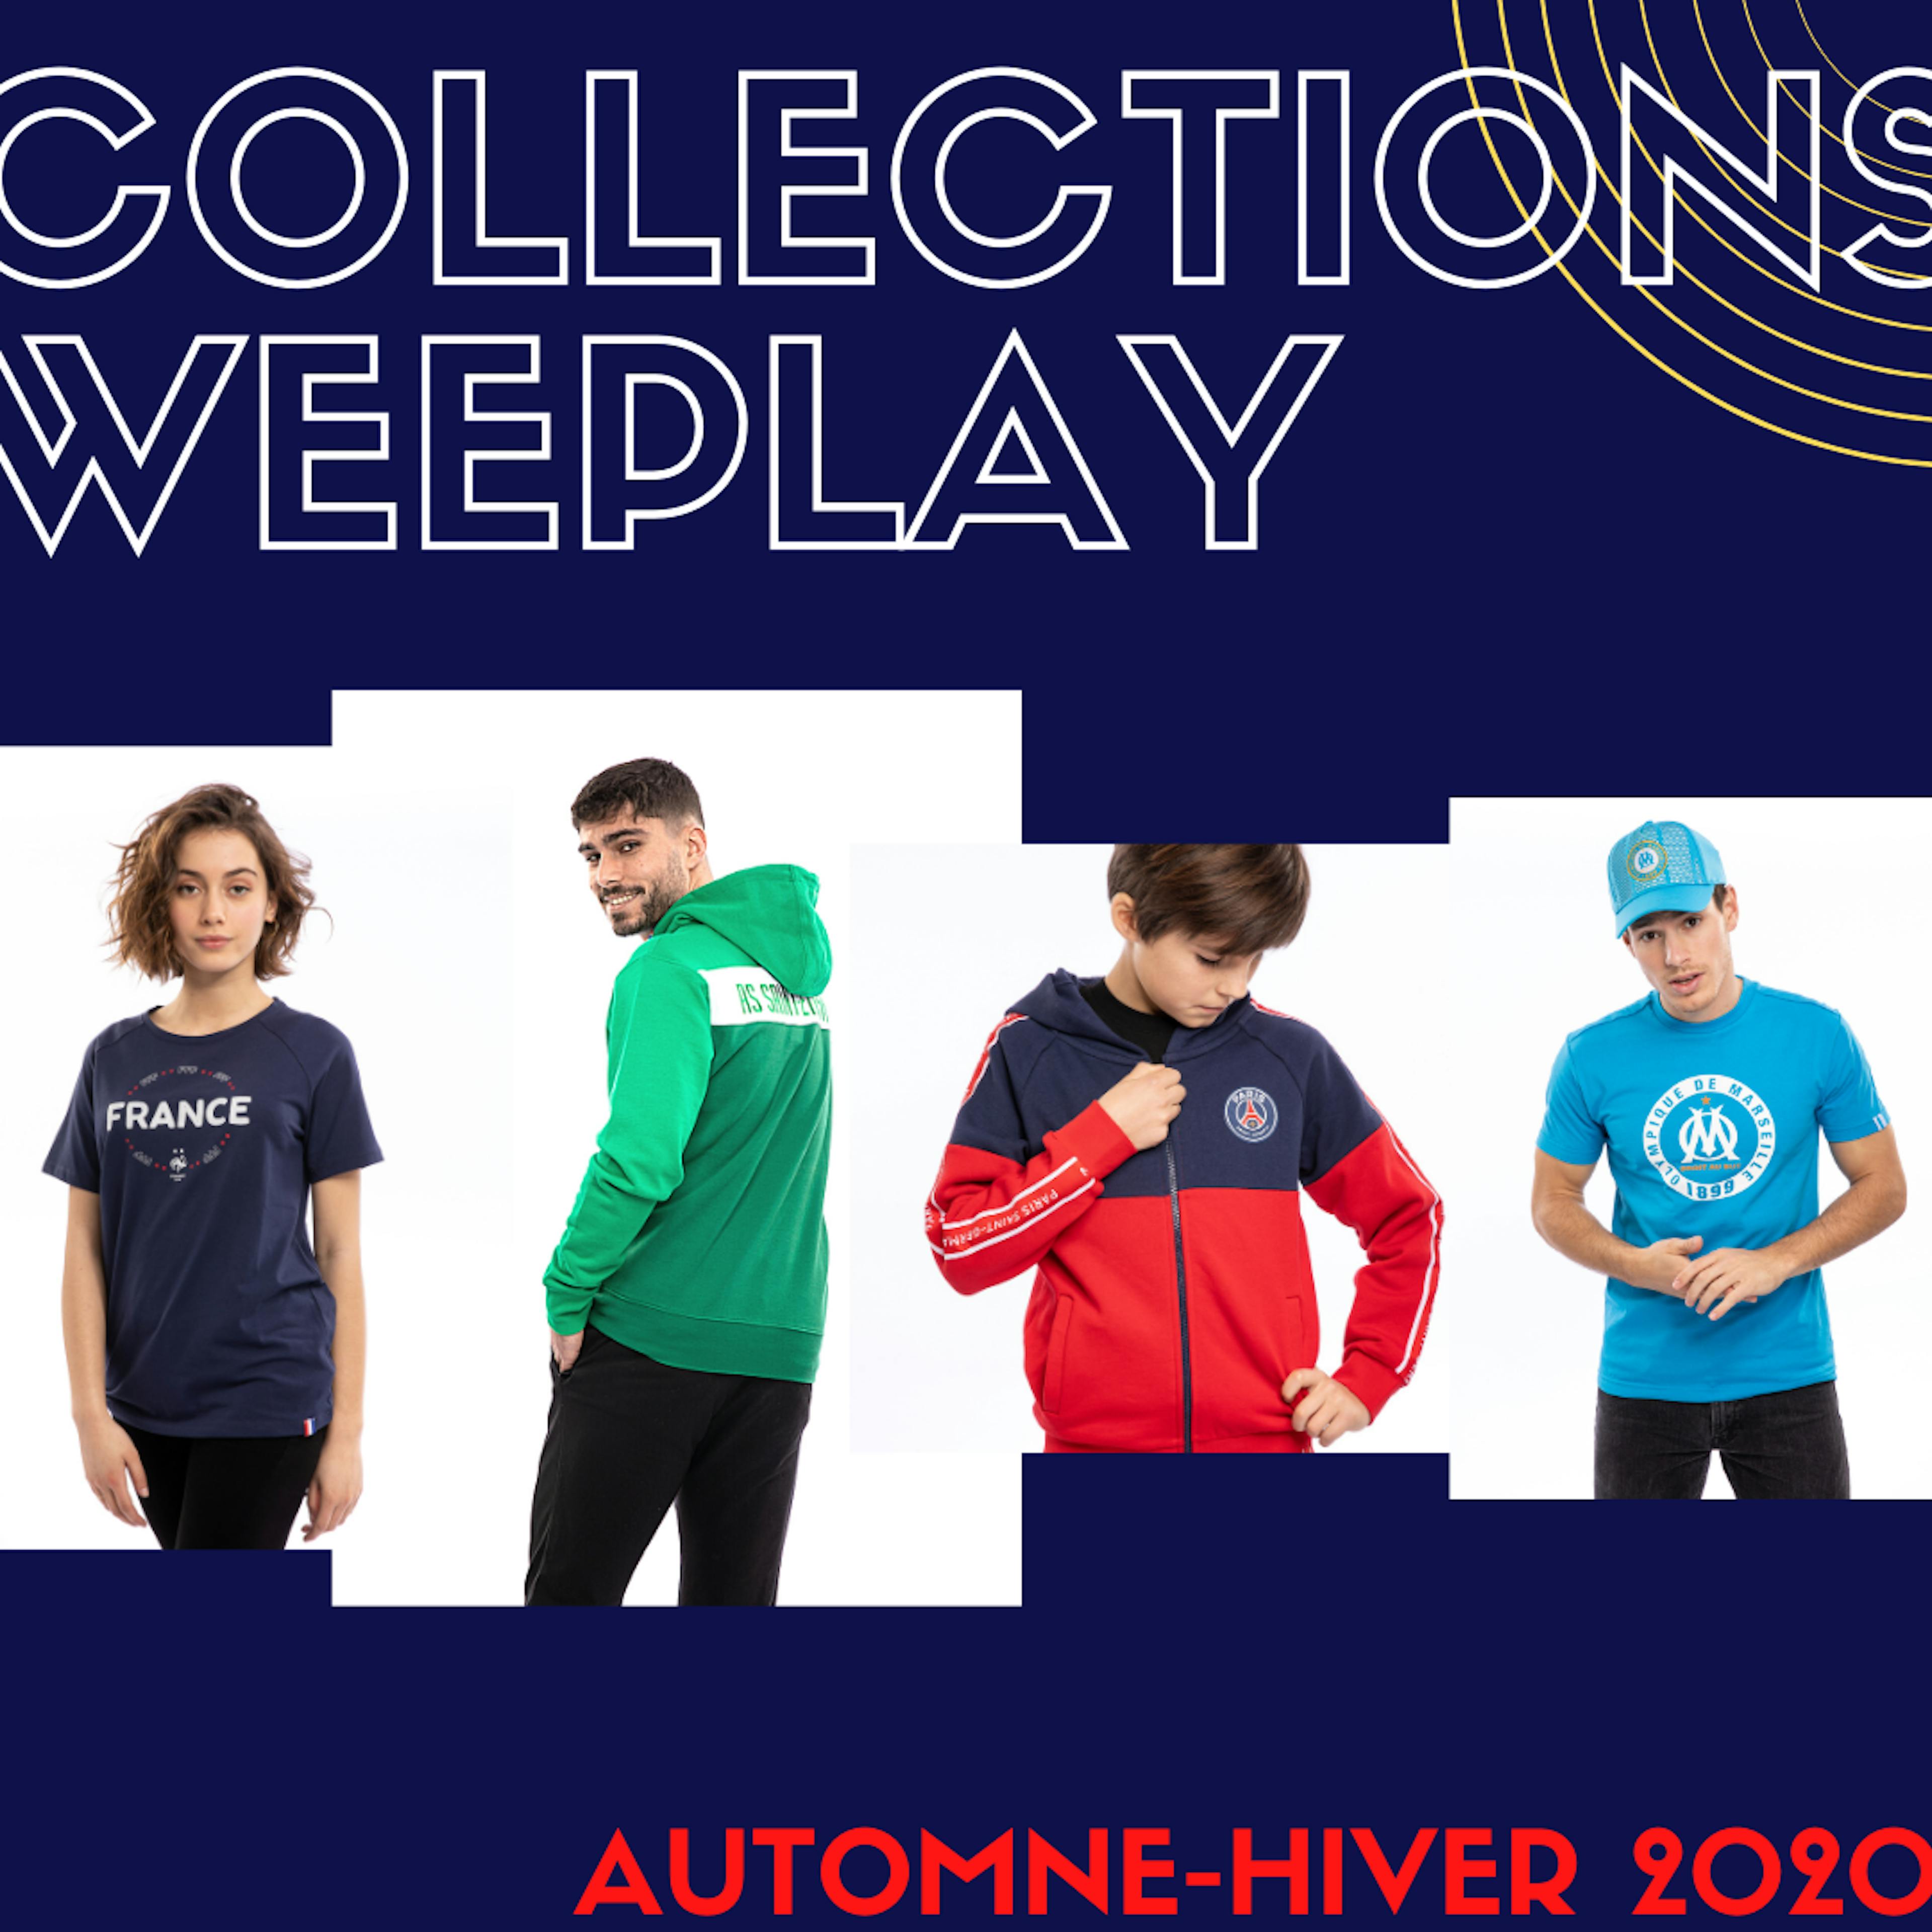 New Fall-Winter collections are now available